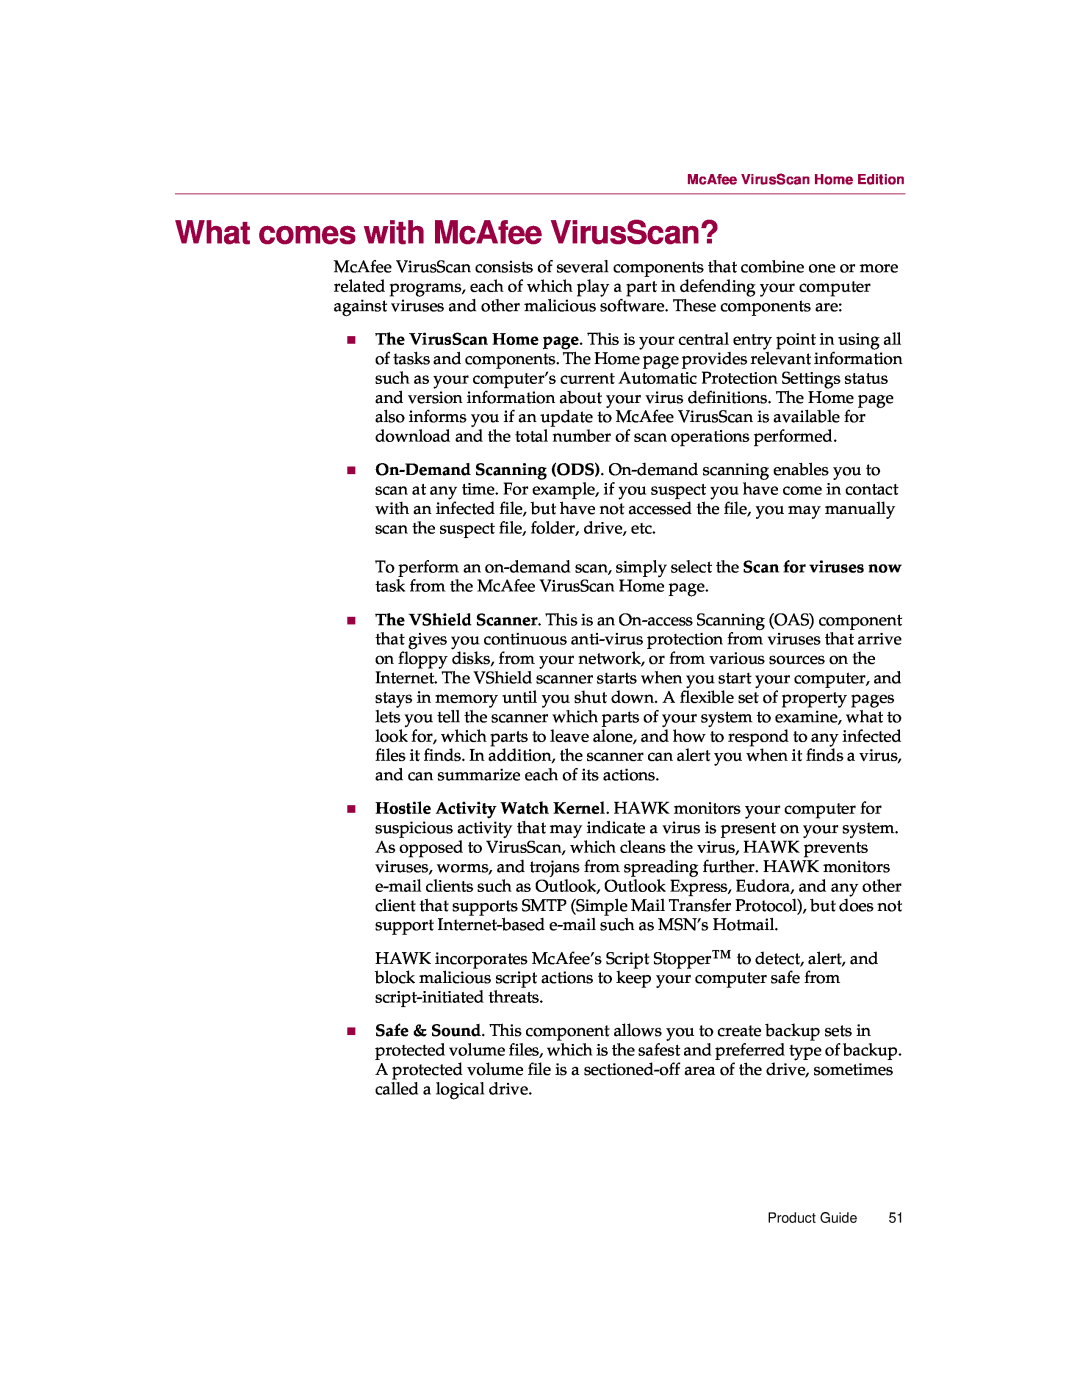 McAfee 5 manual What comes with McAfee VirusScan?, Product Guide 